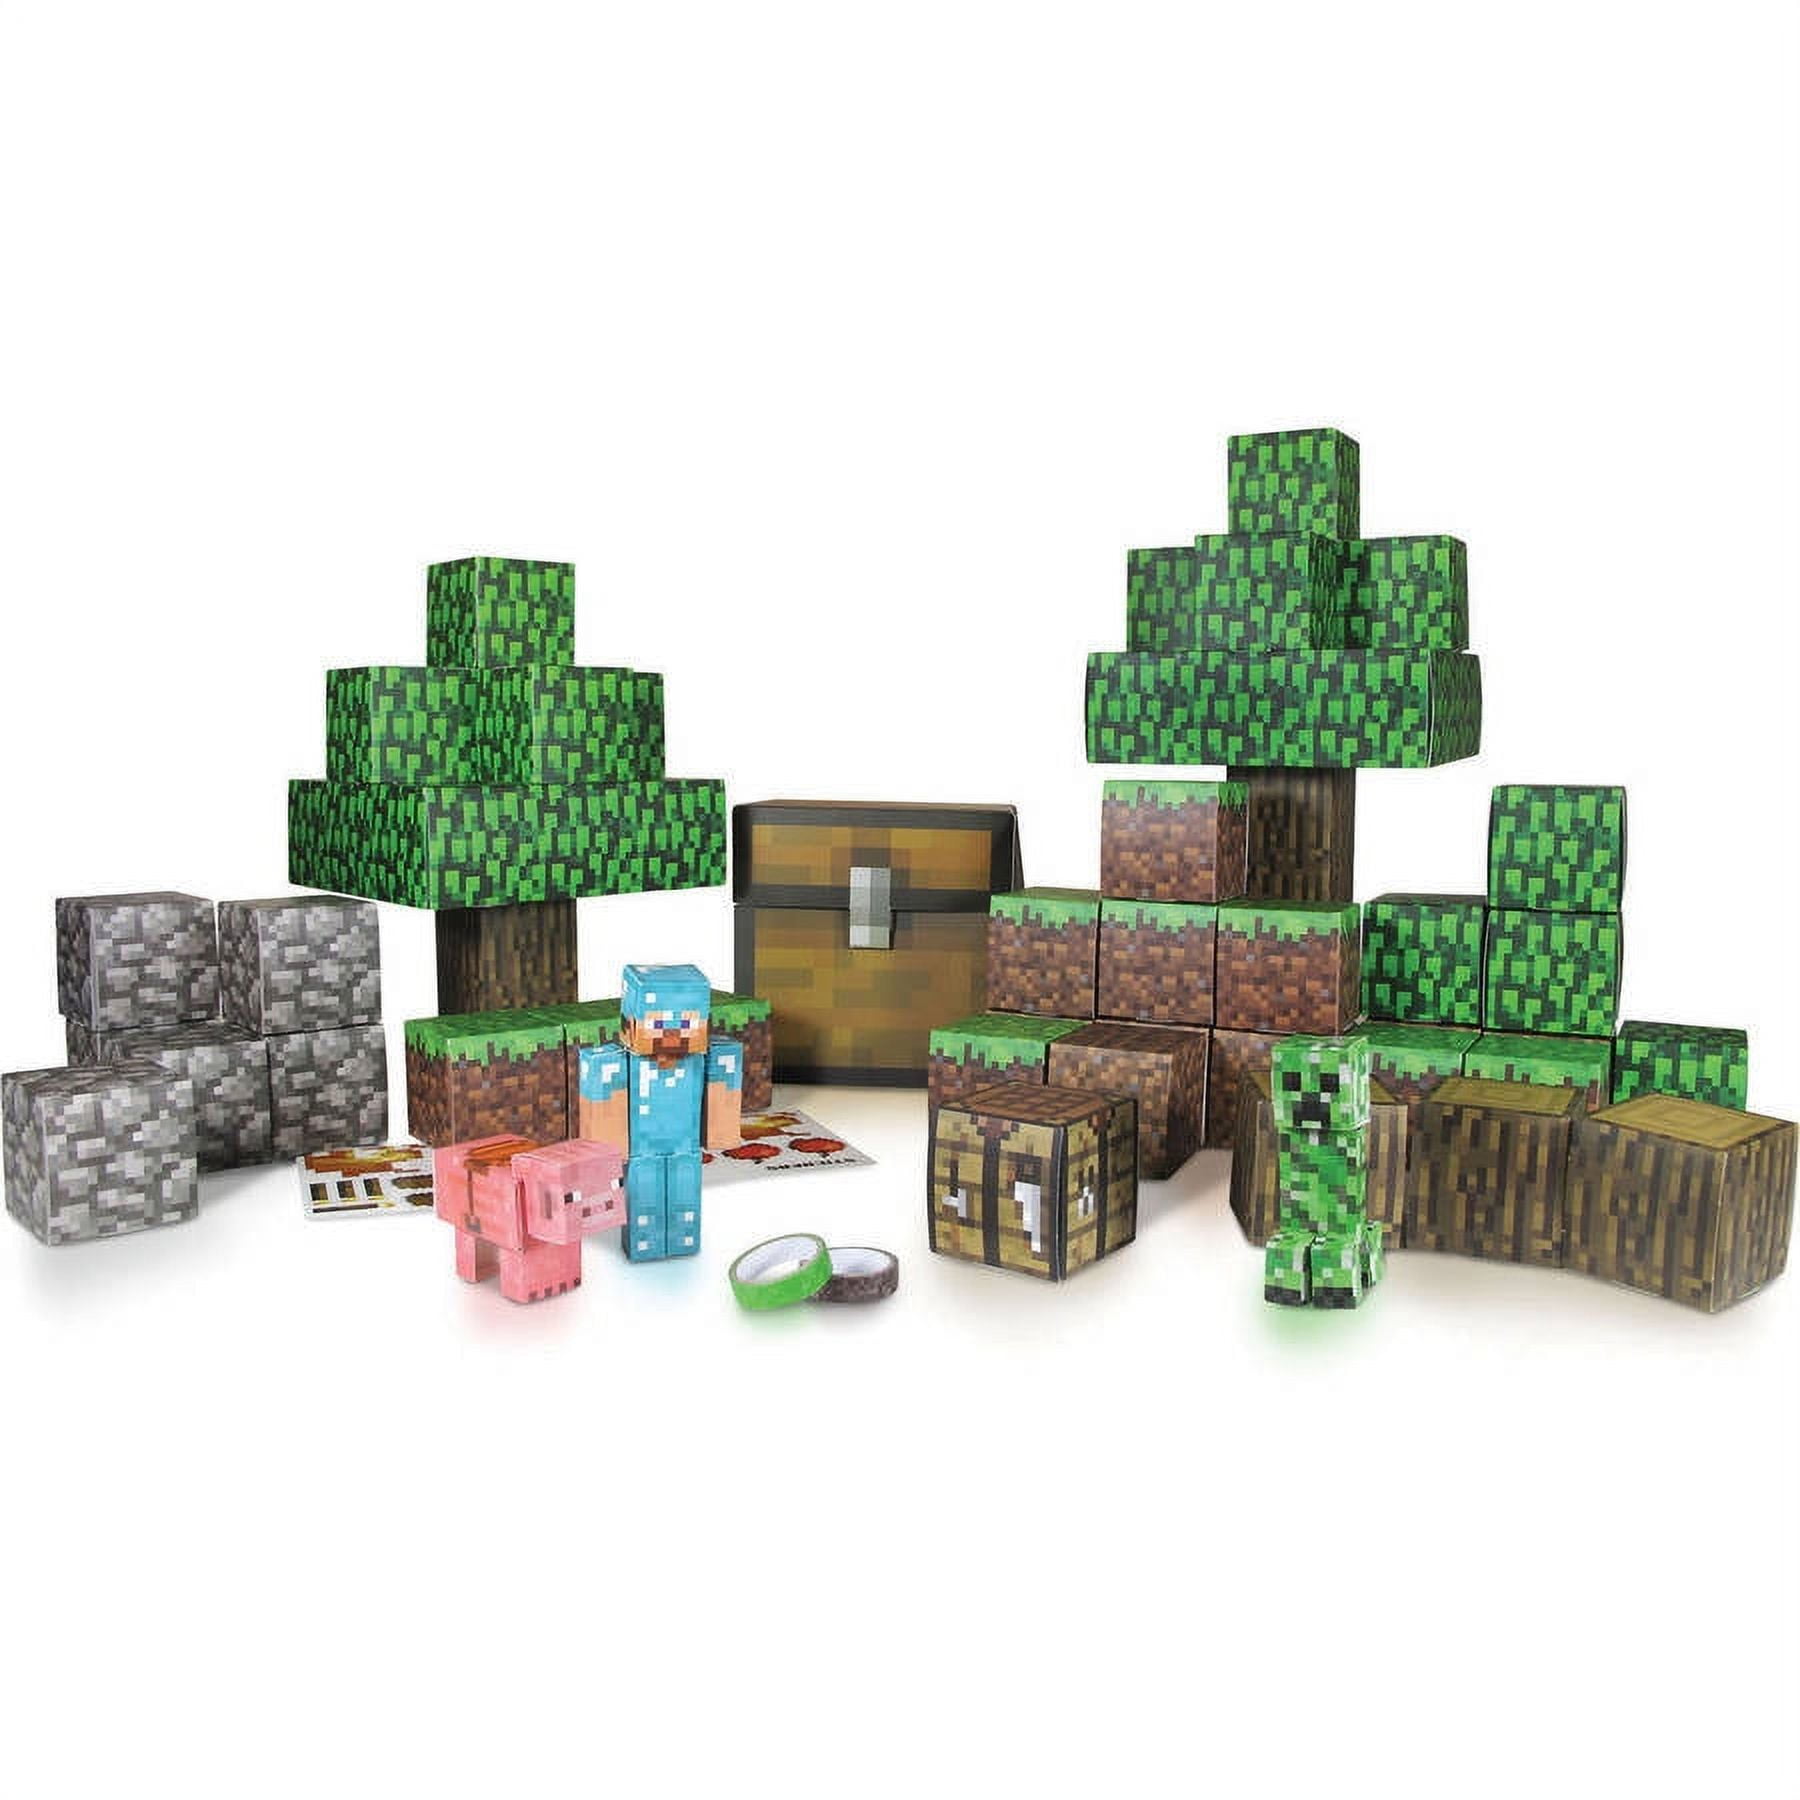 MineCraft papercraft projects for when they can't get on the computer